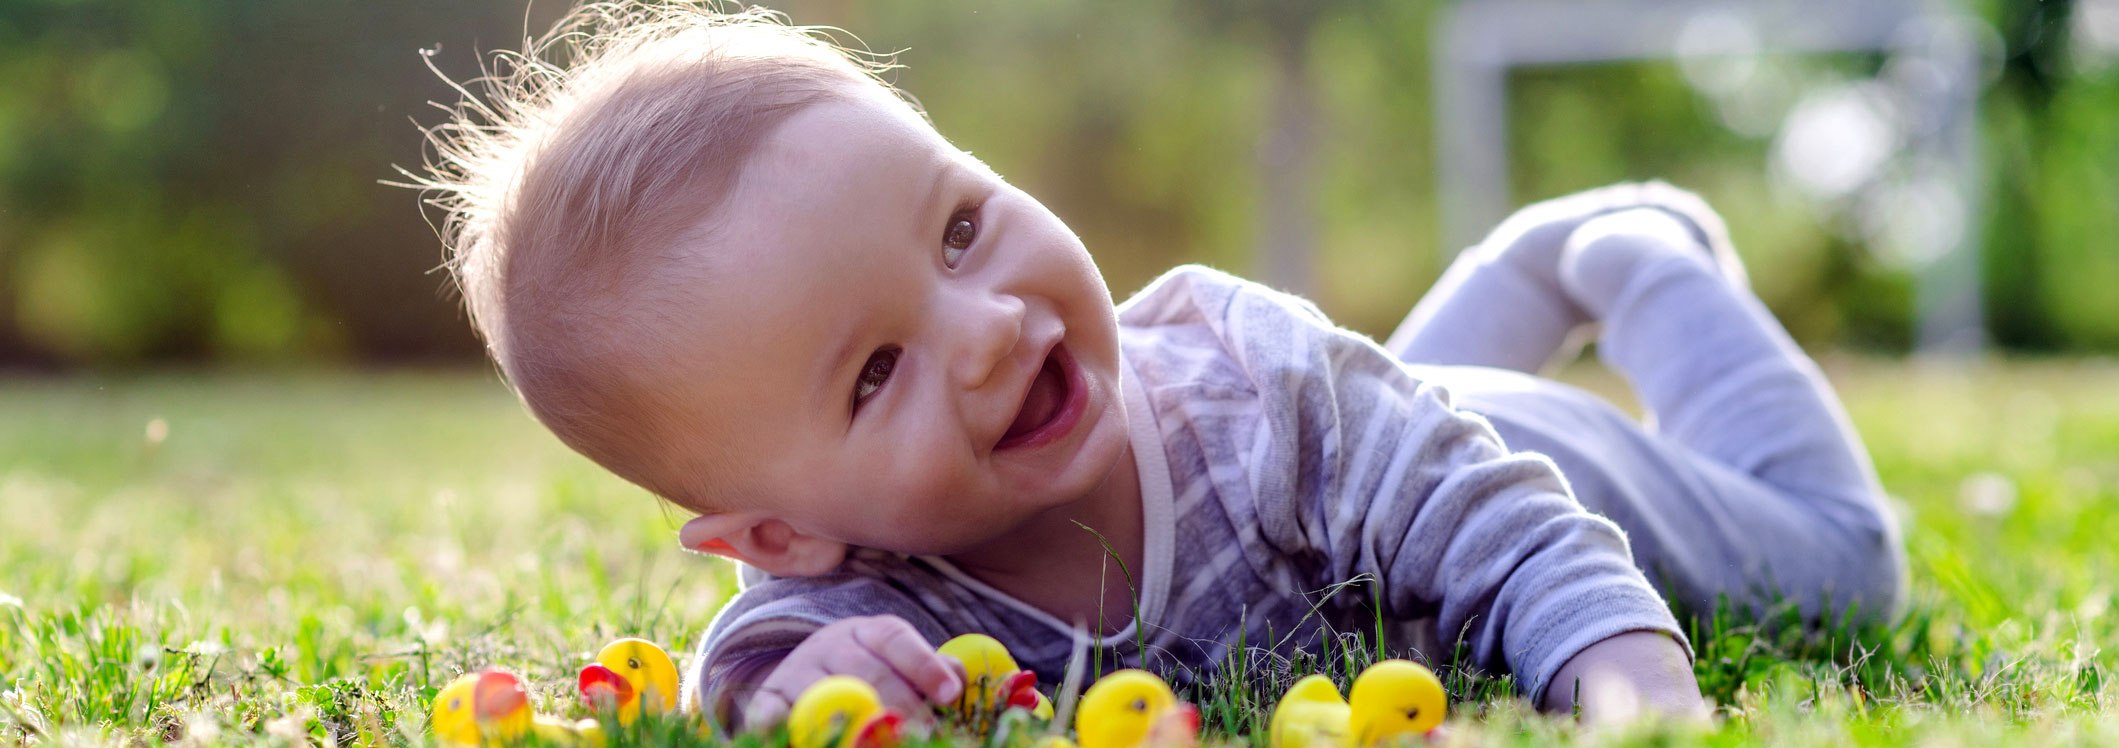 A baby lauging with rubber ducks on grass